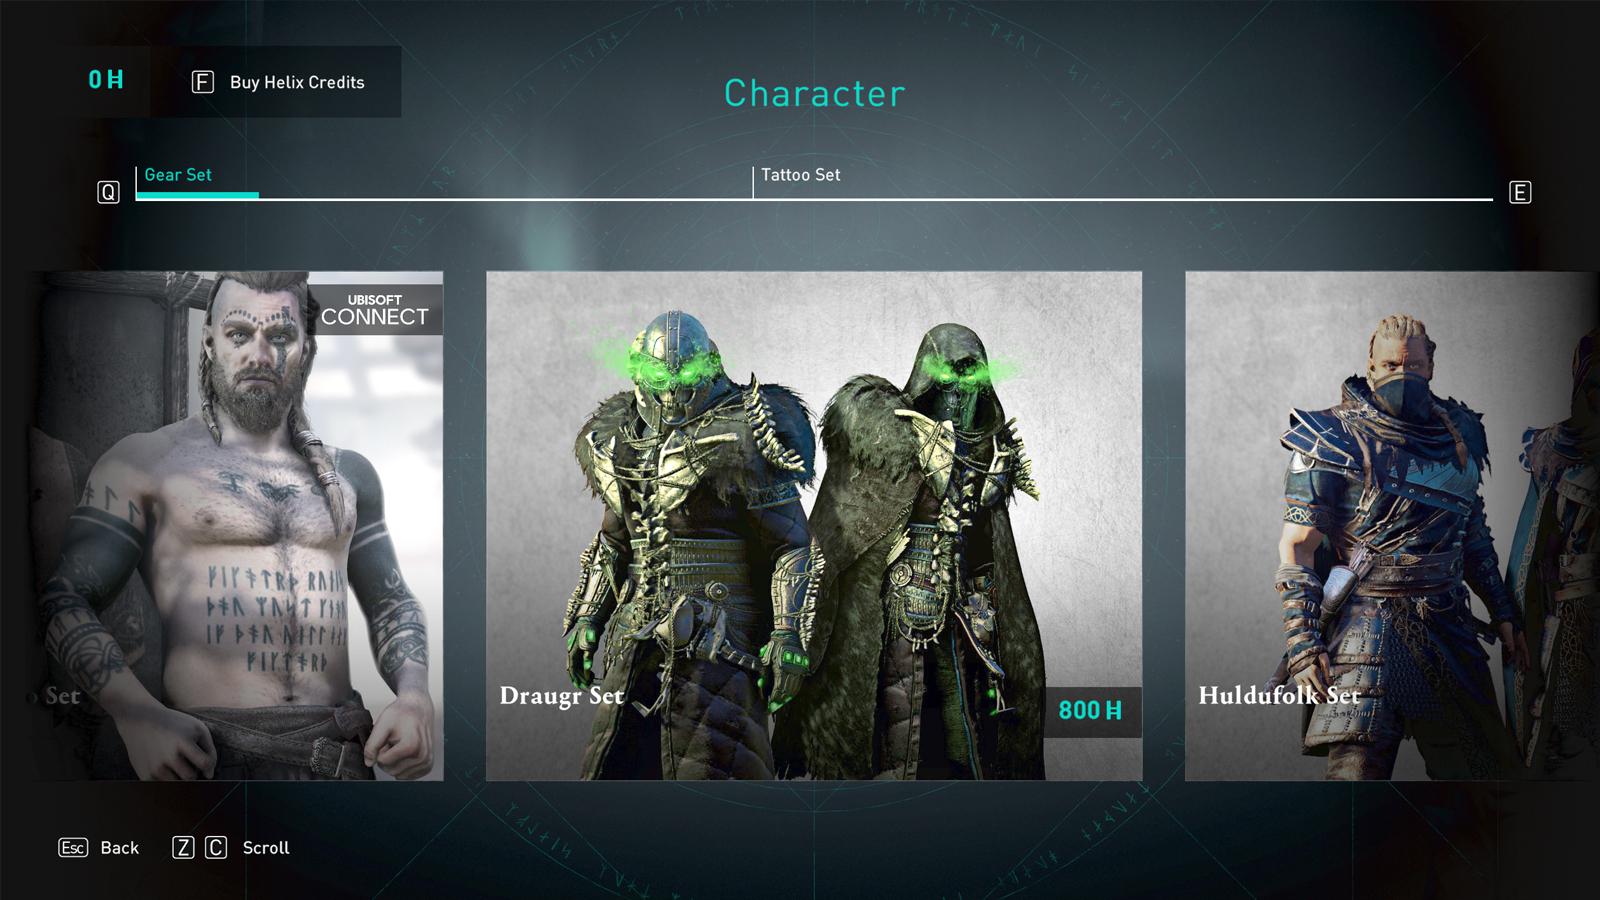 The Draugr set in the Valhalla store